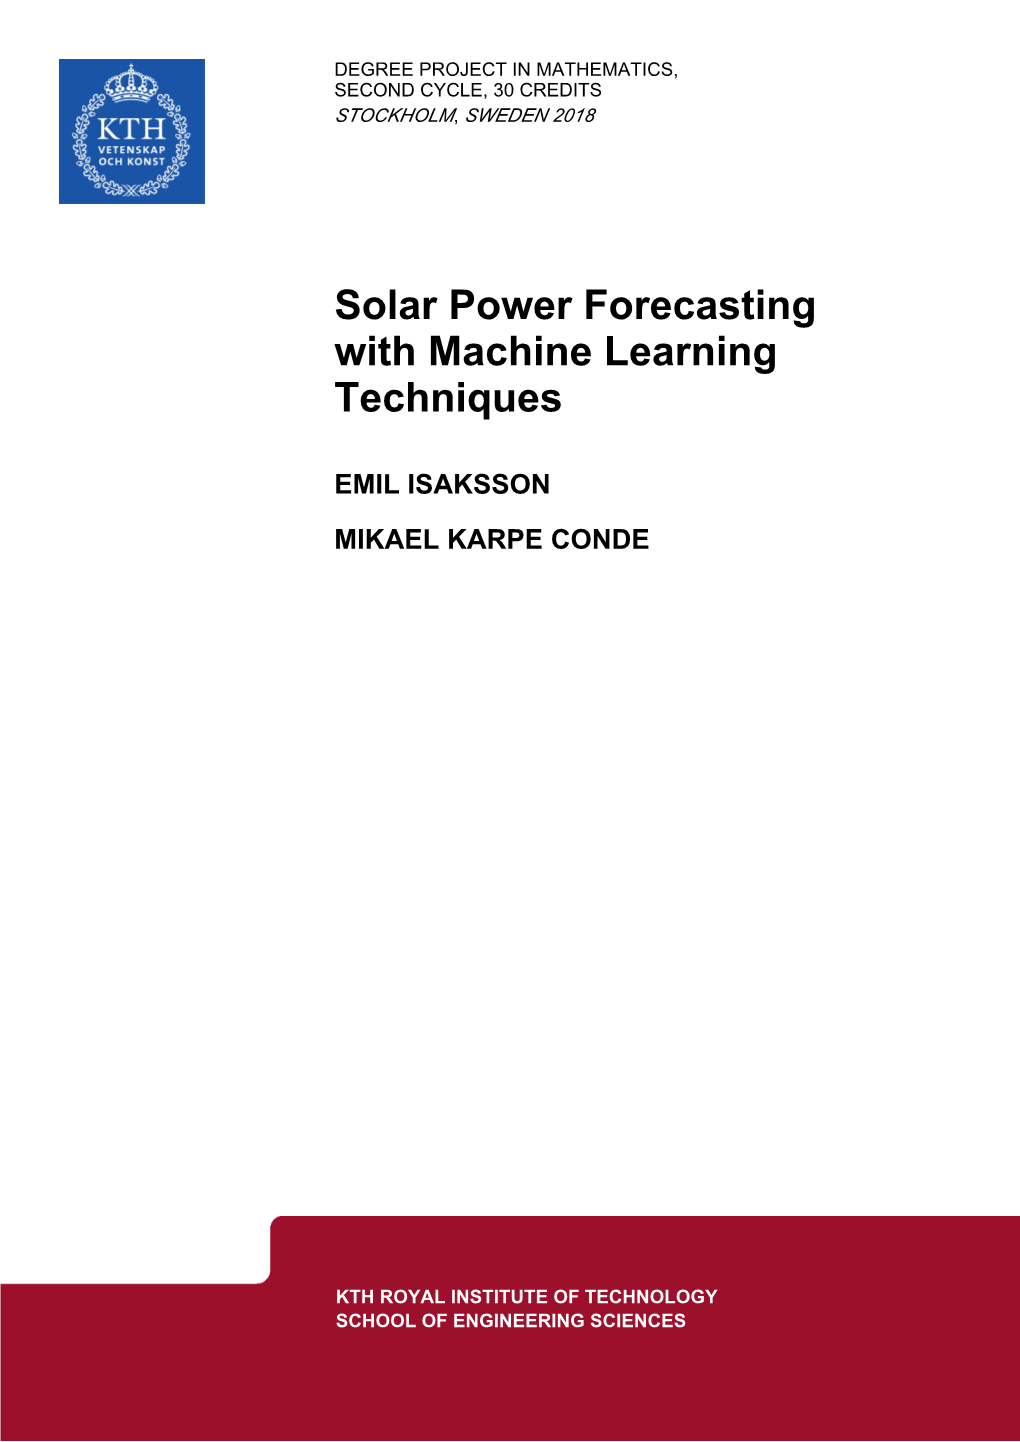 Solar Power Forecasting with Machine Learning Techniques